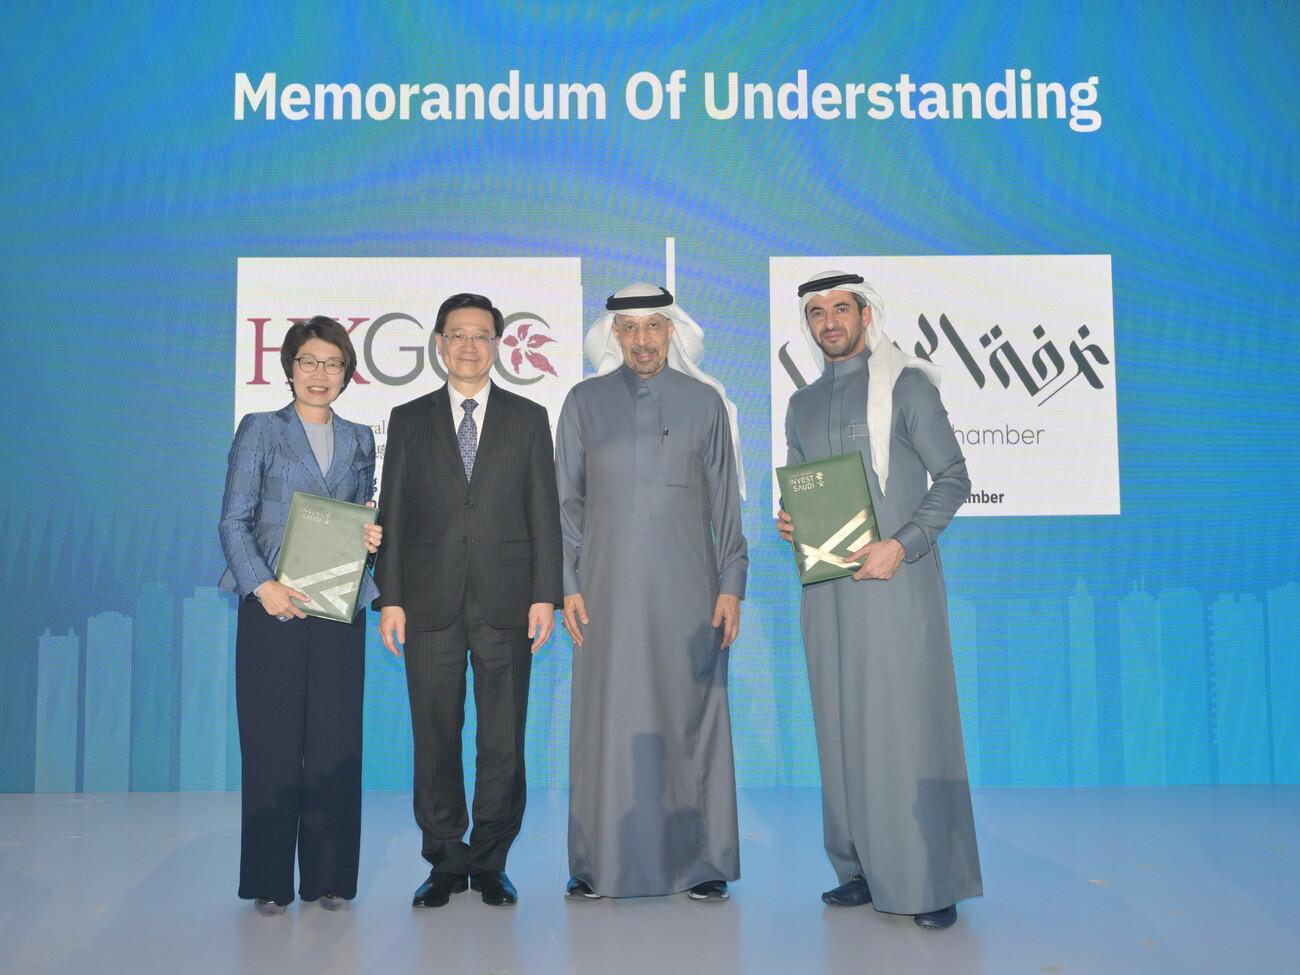 The Chief Executive, Mr John Lee, attended the Kingdom of Saudi Arabia-Hong Kong Investment Forum and Chinese New Year Gala Dinner in Riyadh, Saudi Arabia, today (February 5, Riyadh time). Photo shows Mr Lee (second left) and the Minister of Investment of Saudi Arabia, Mr Khalid Al-Falih (second right) witnessing the exchange of six Memorandum of Understandings or Letter of Intent between Hong Kong and Saudi Arabian enterprises or organisations, covering finance, innovation technology, business, transportation and energy, etc. 